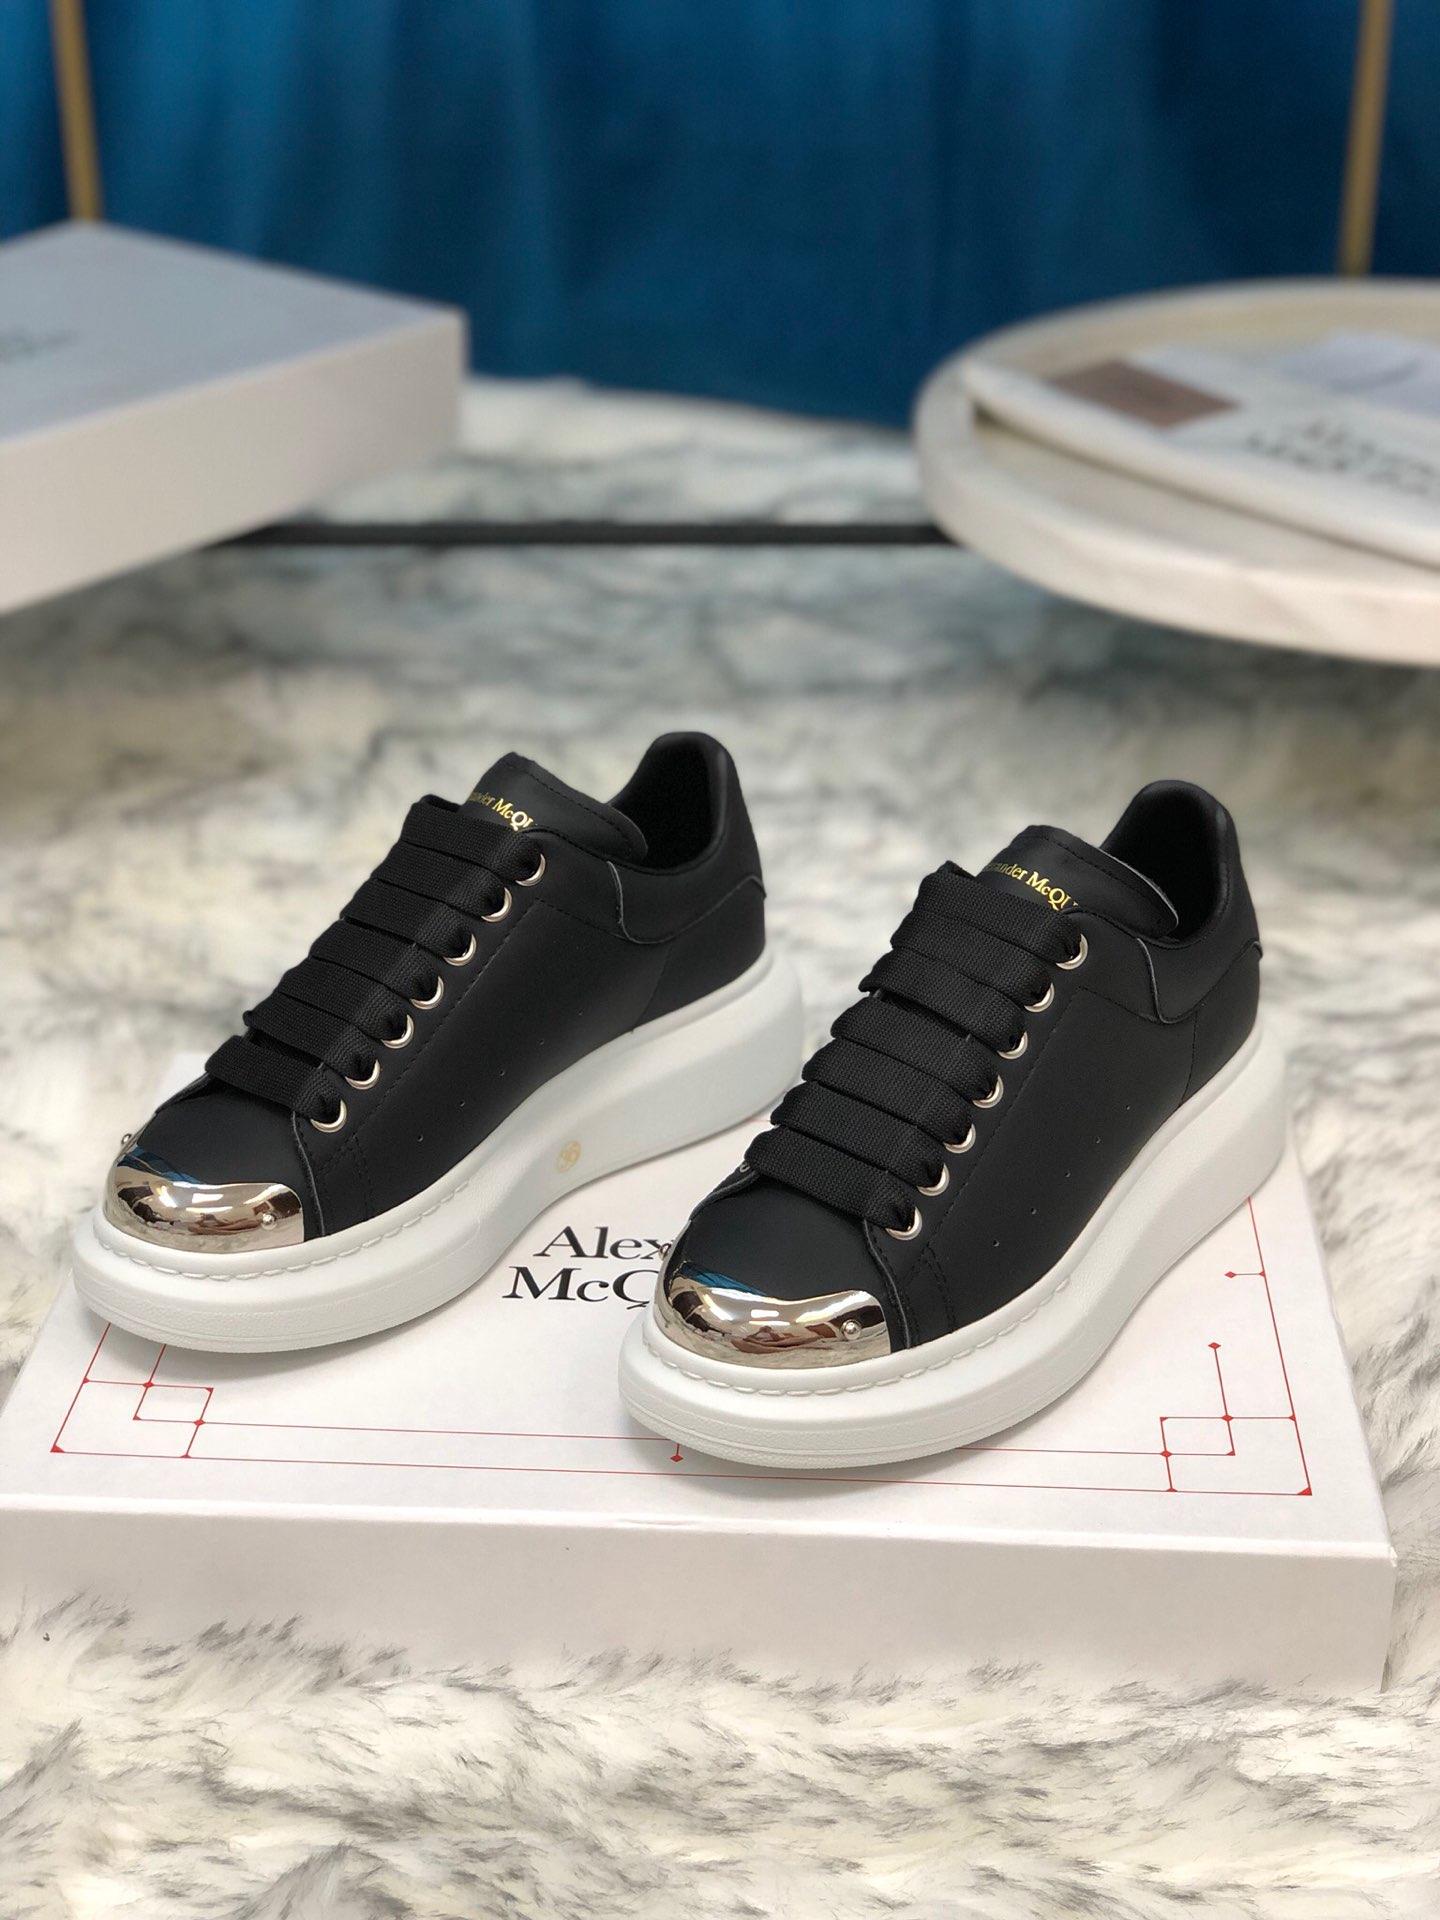 Alexander McQueen Fahion Sneakers Black and silver metal toe MS100036